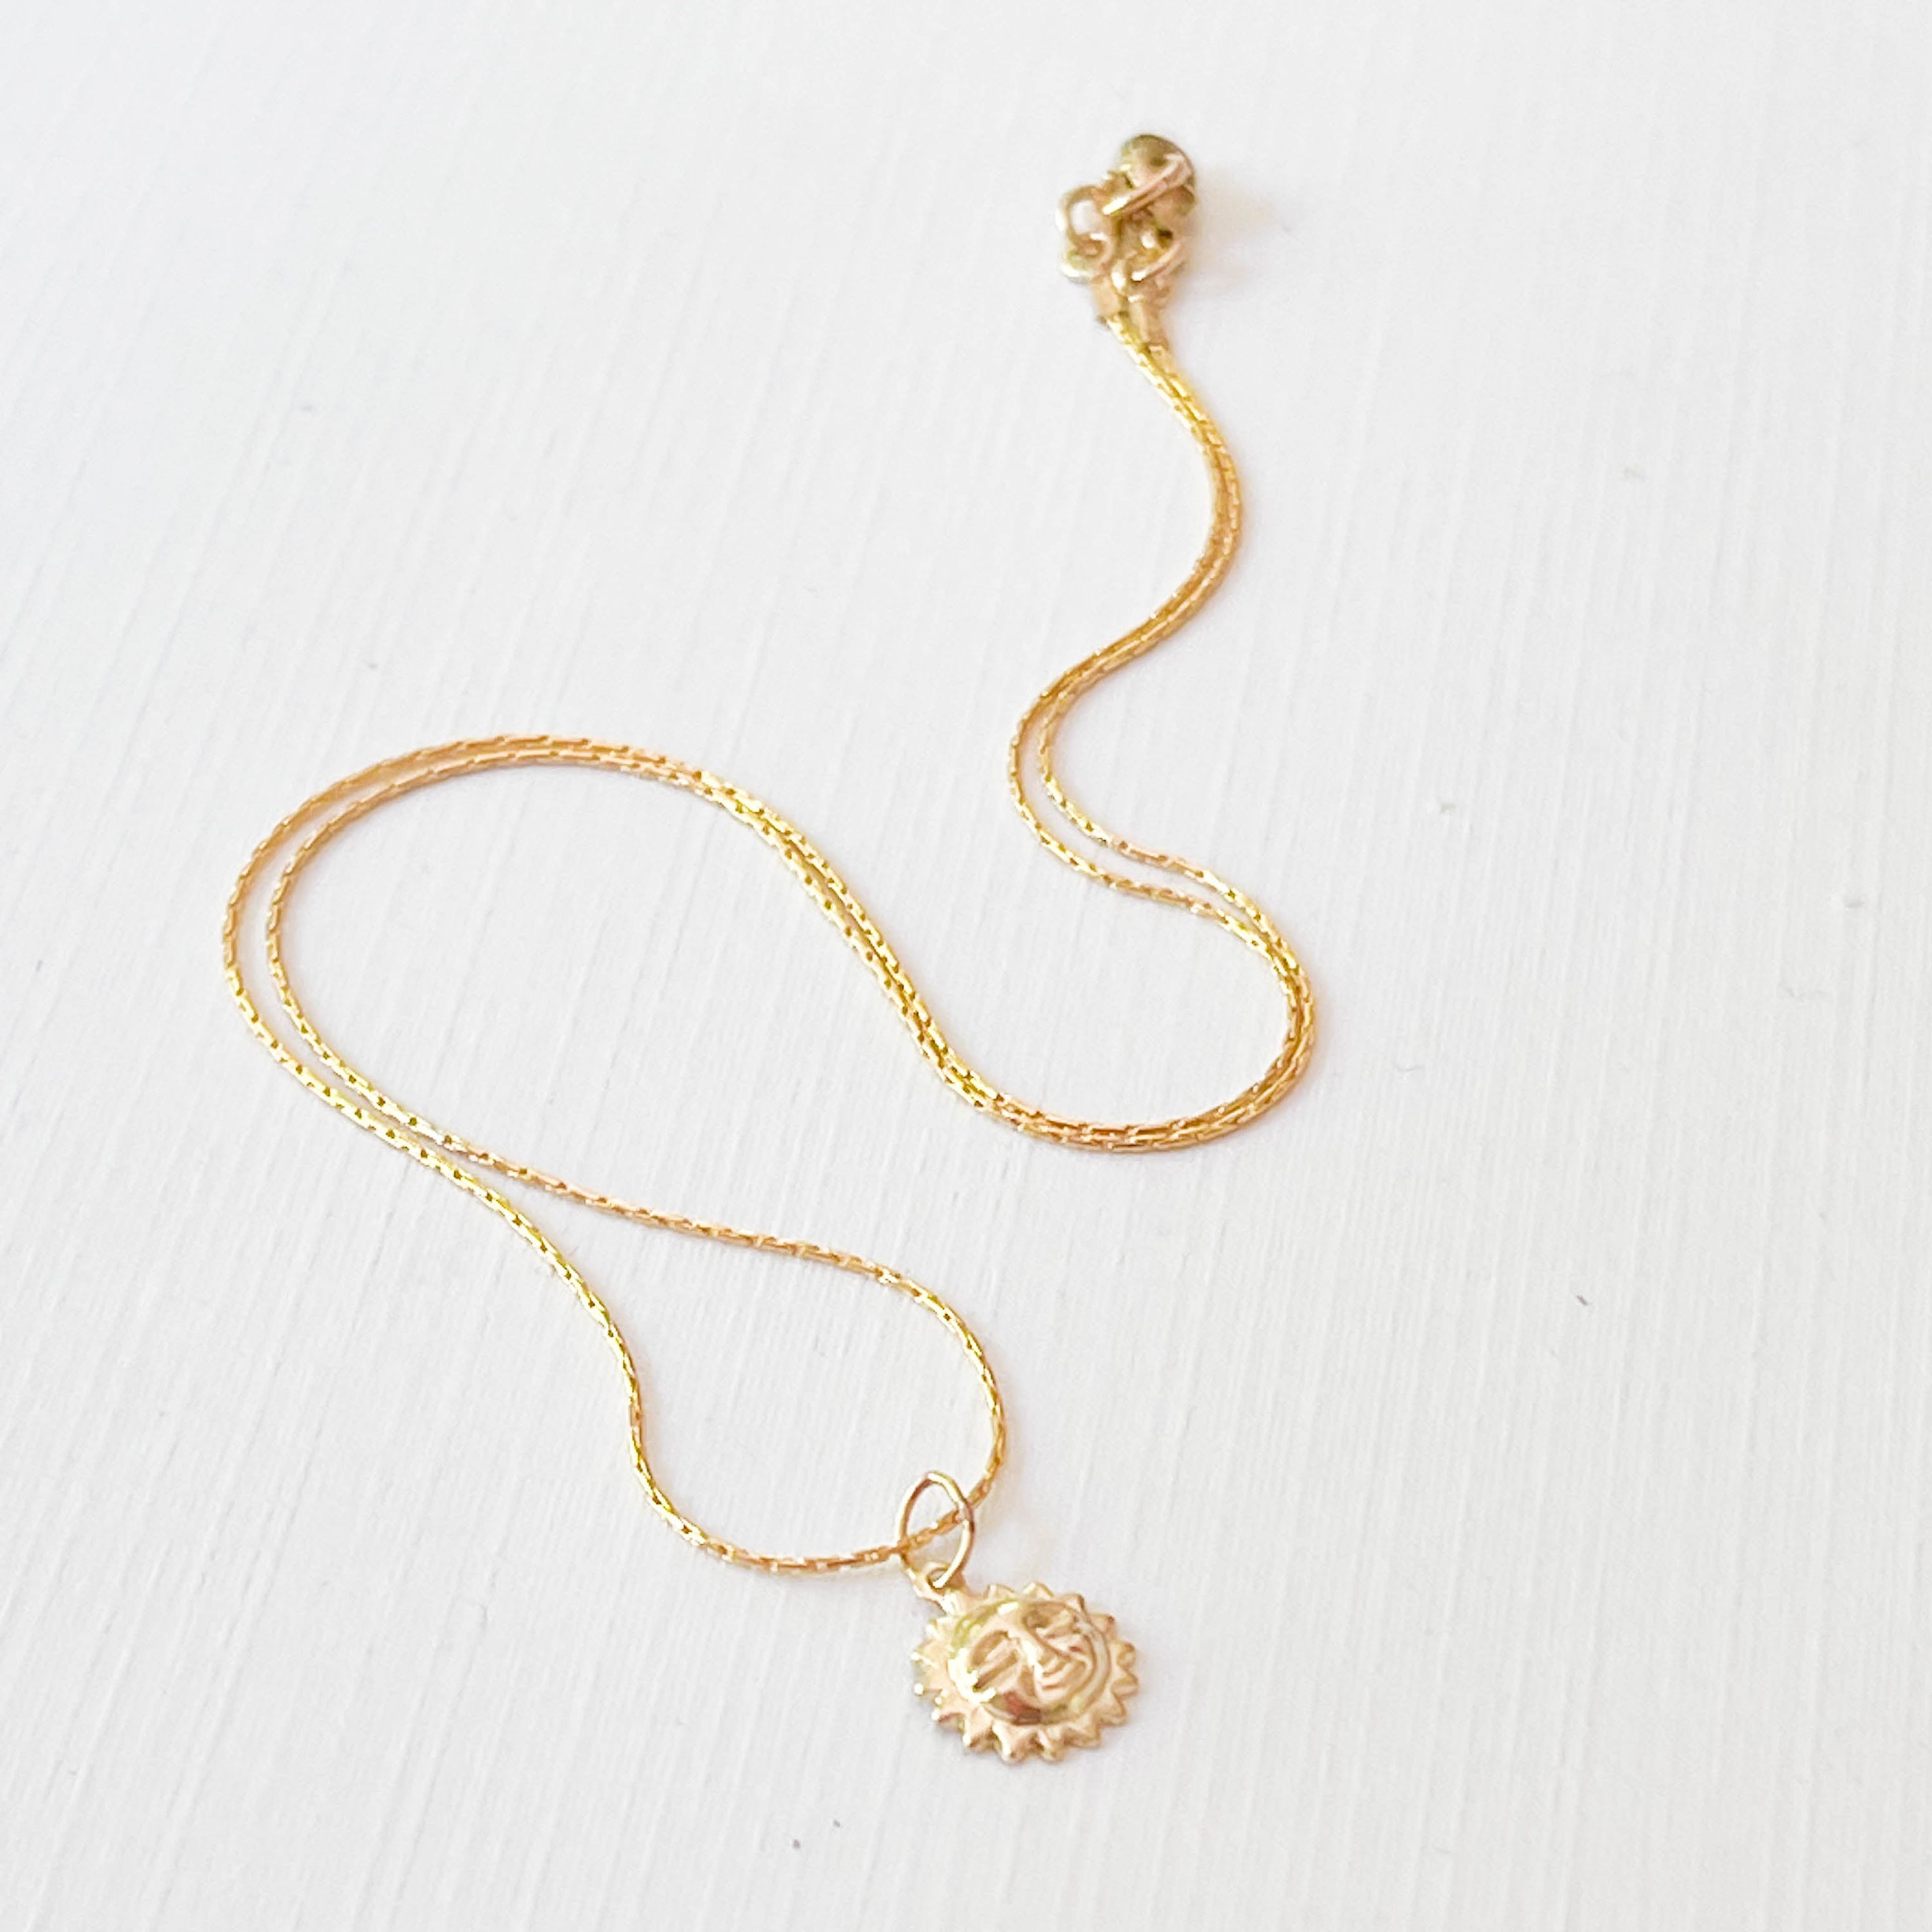 Gold Filled Charm Necklace with a Heart, Starfish or Sun  - WS